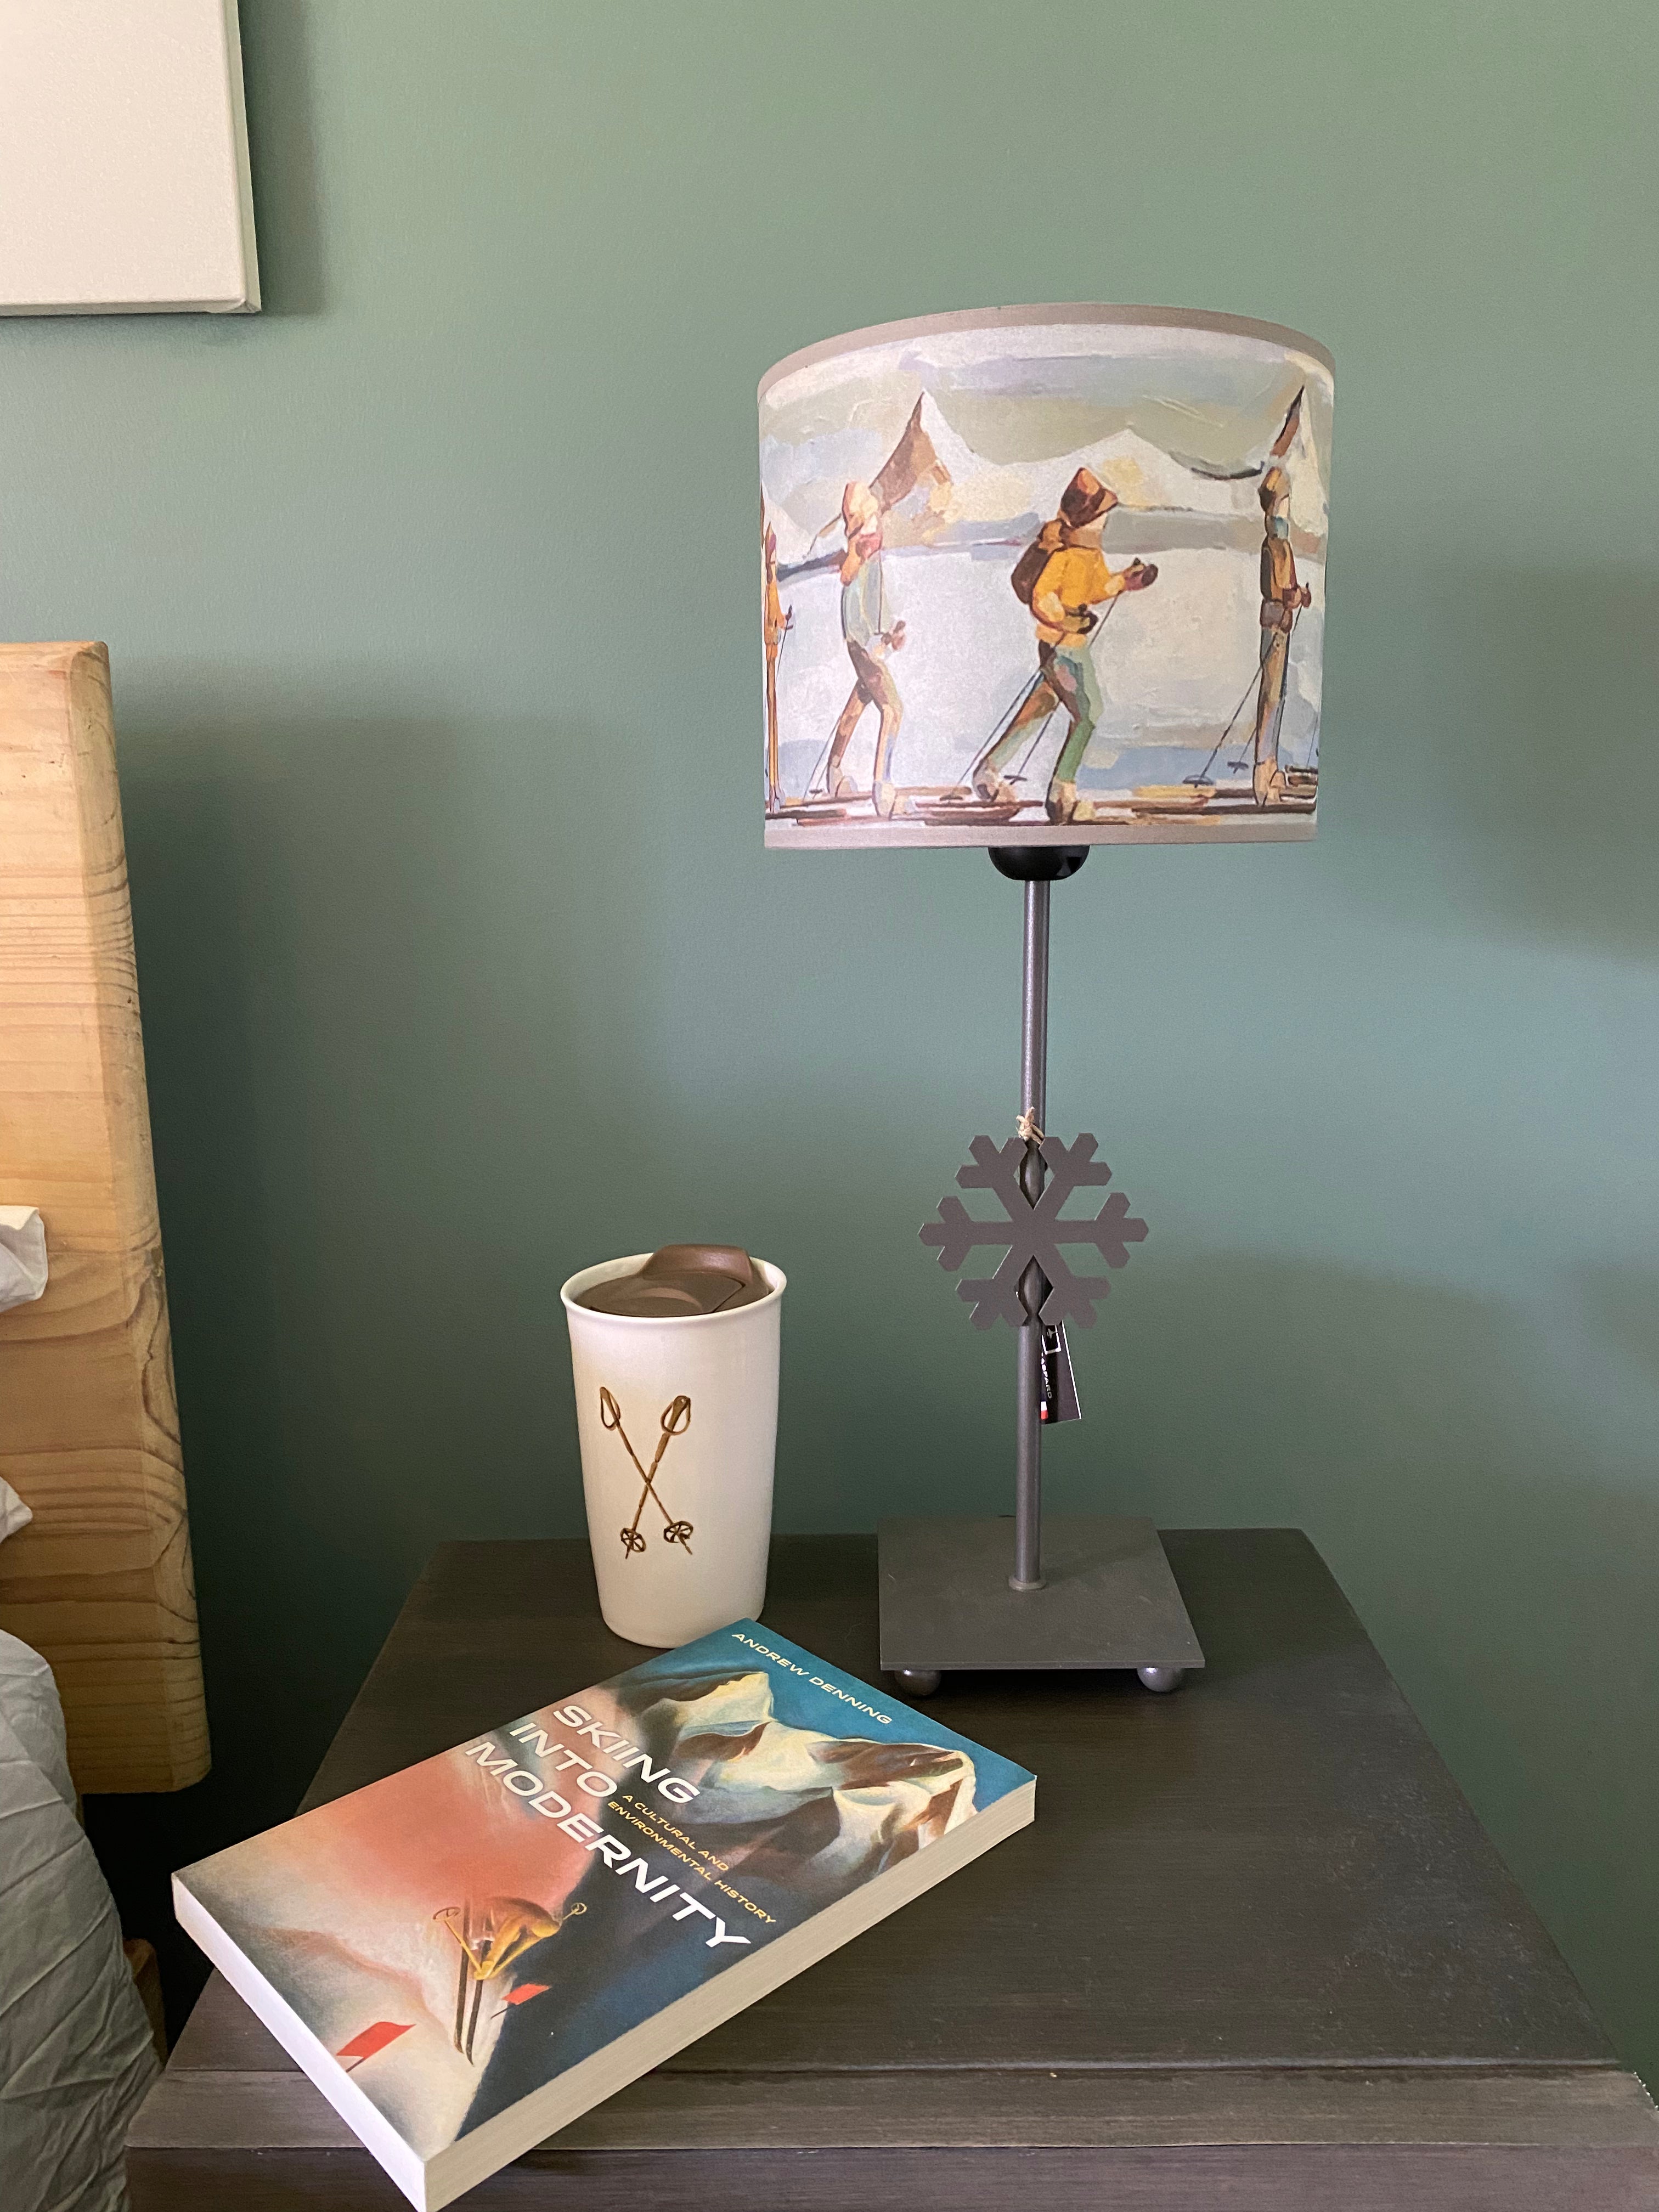 lamp with a square grey solid metal base supporting a rod with ca snowflake mid way up the rod, topped by a colourful canvas lamp shade. The shade depicts people on skis skinning across the snow in a line, one in front of the other, with snow capped mountains in the background. Sitting on a wooden table with a mug with picture of vintage poles, and the book "skiing into Modernity in front of a green wall, beside a bed.